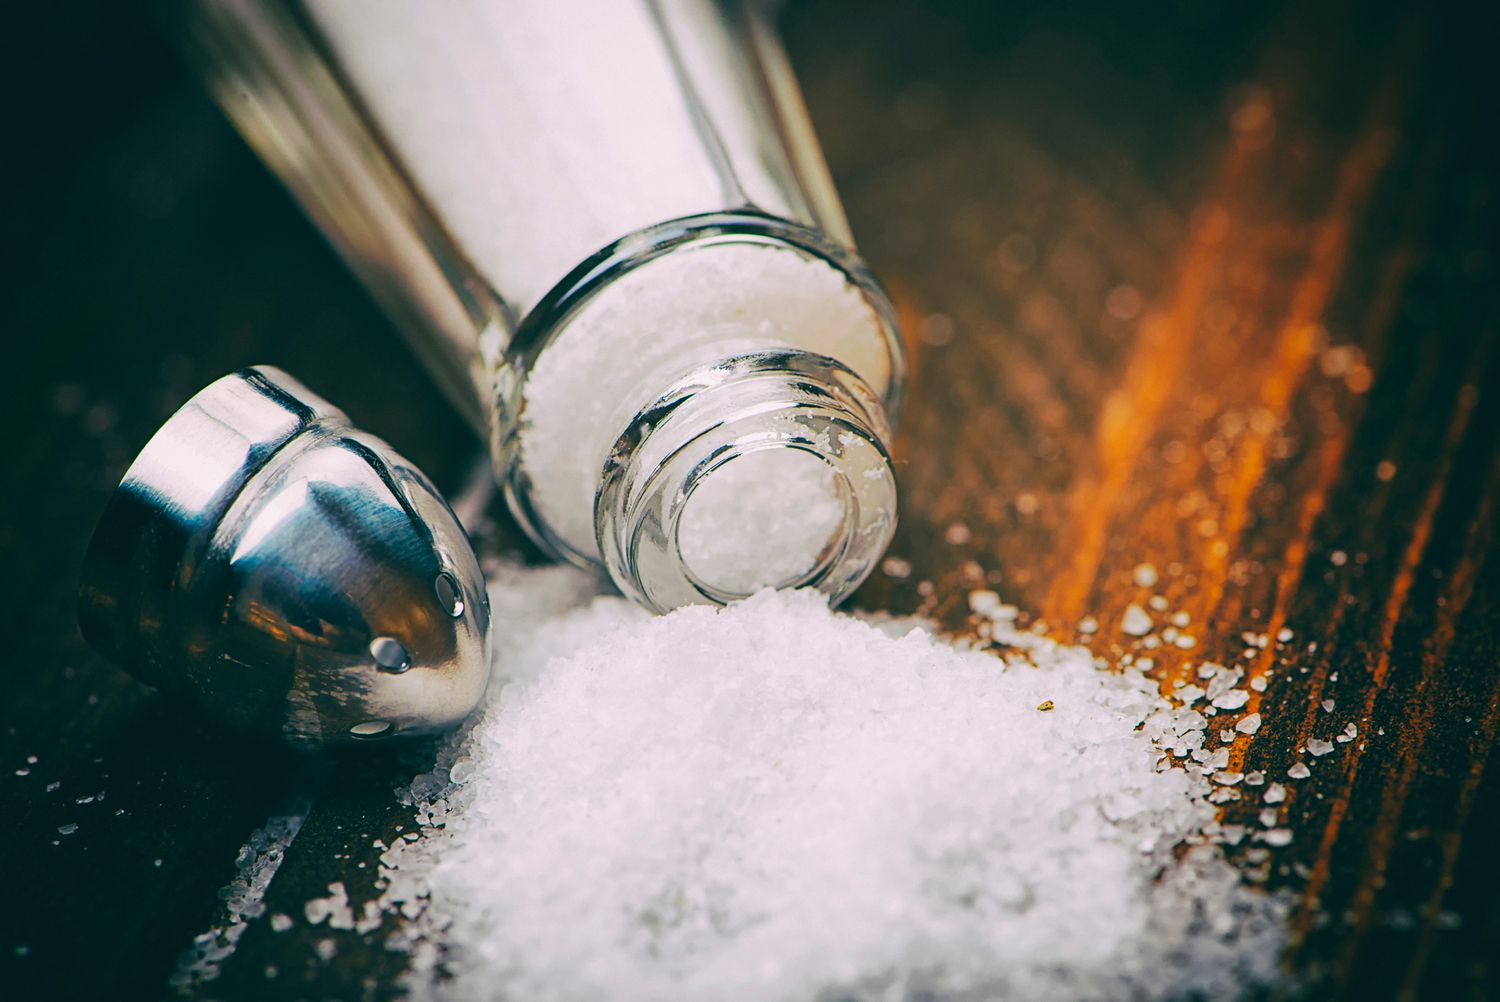 What are the risks of using table salt for piercings